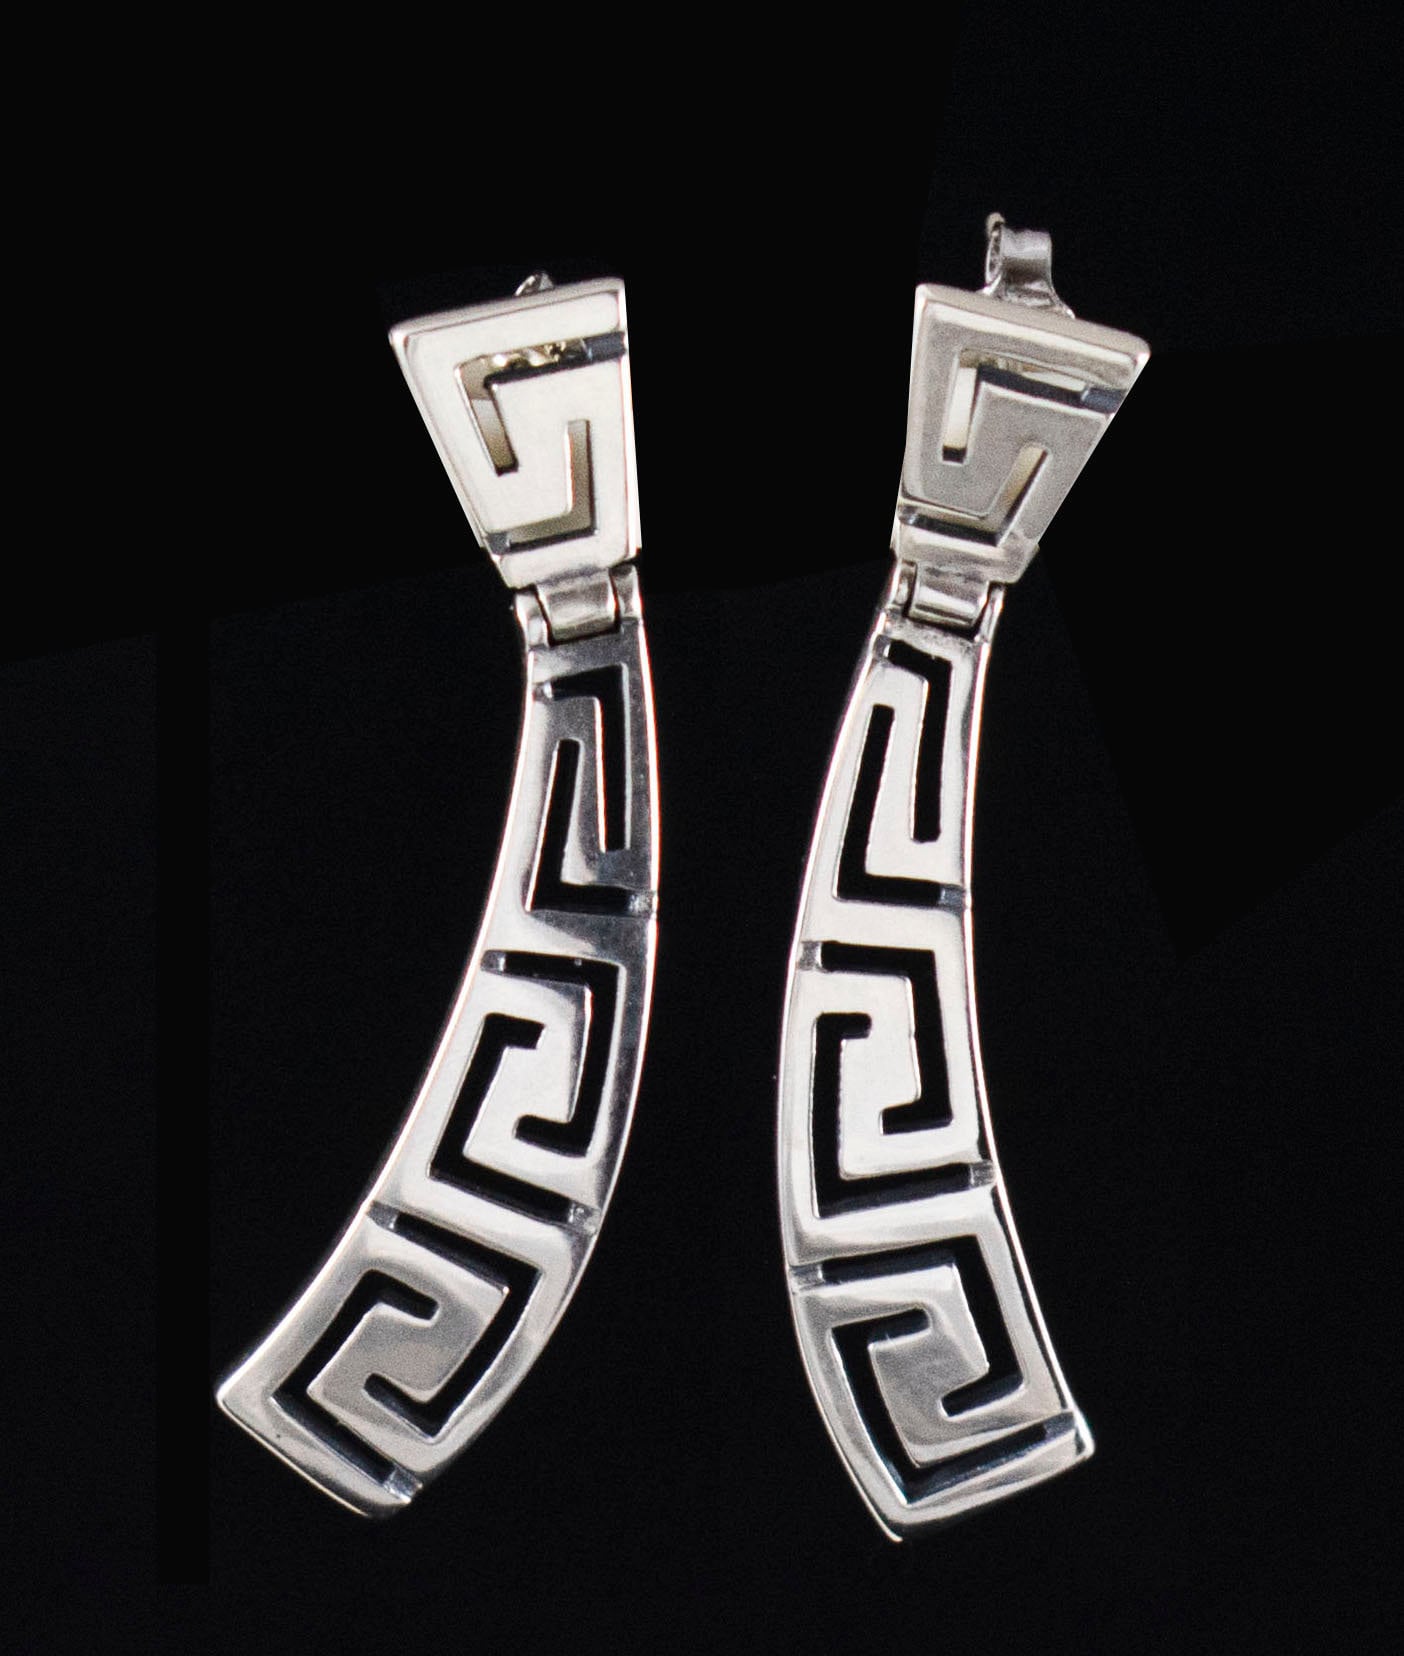 Meandros Greek Key Handcrafted Silver Earrings-Meander-Symbol Of Infinity & Unity-Ancient Motif-Crete